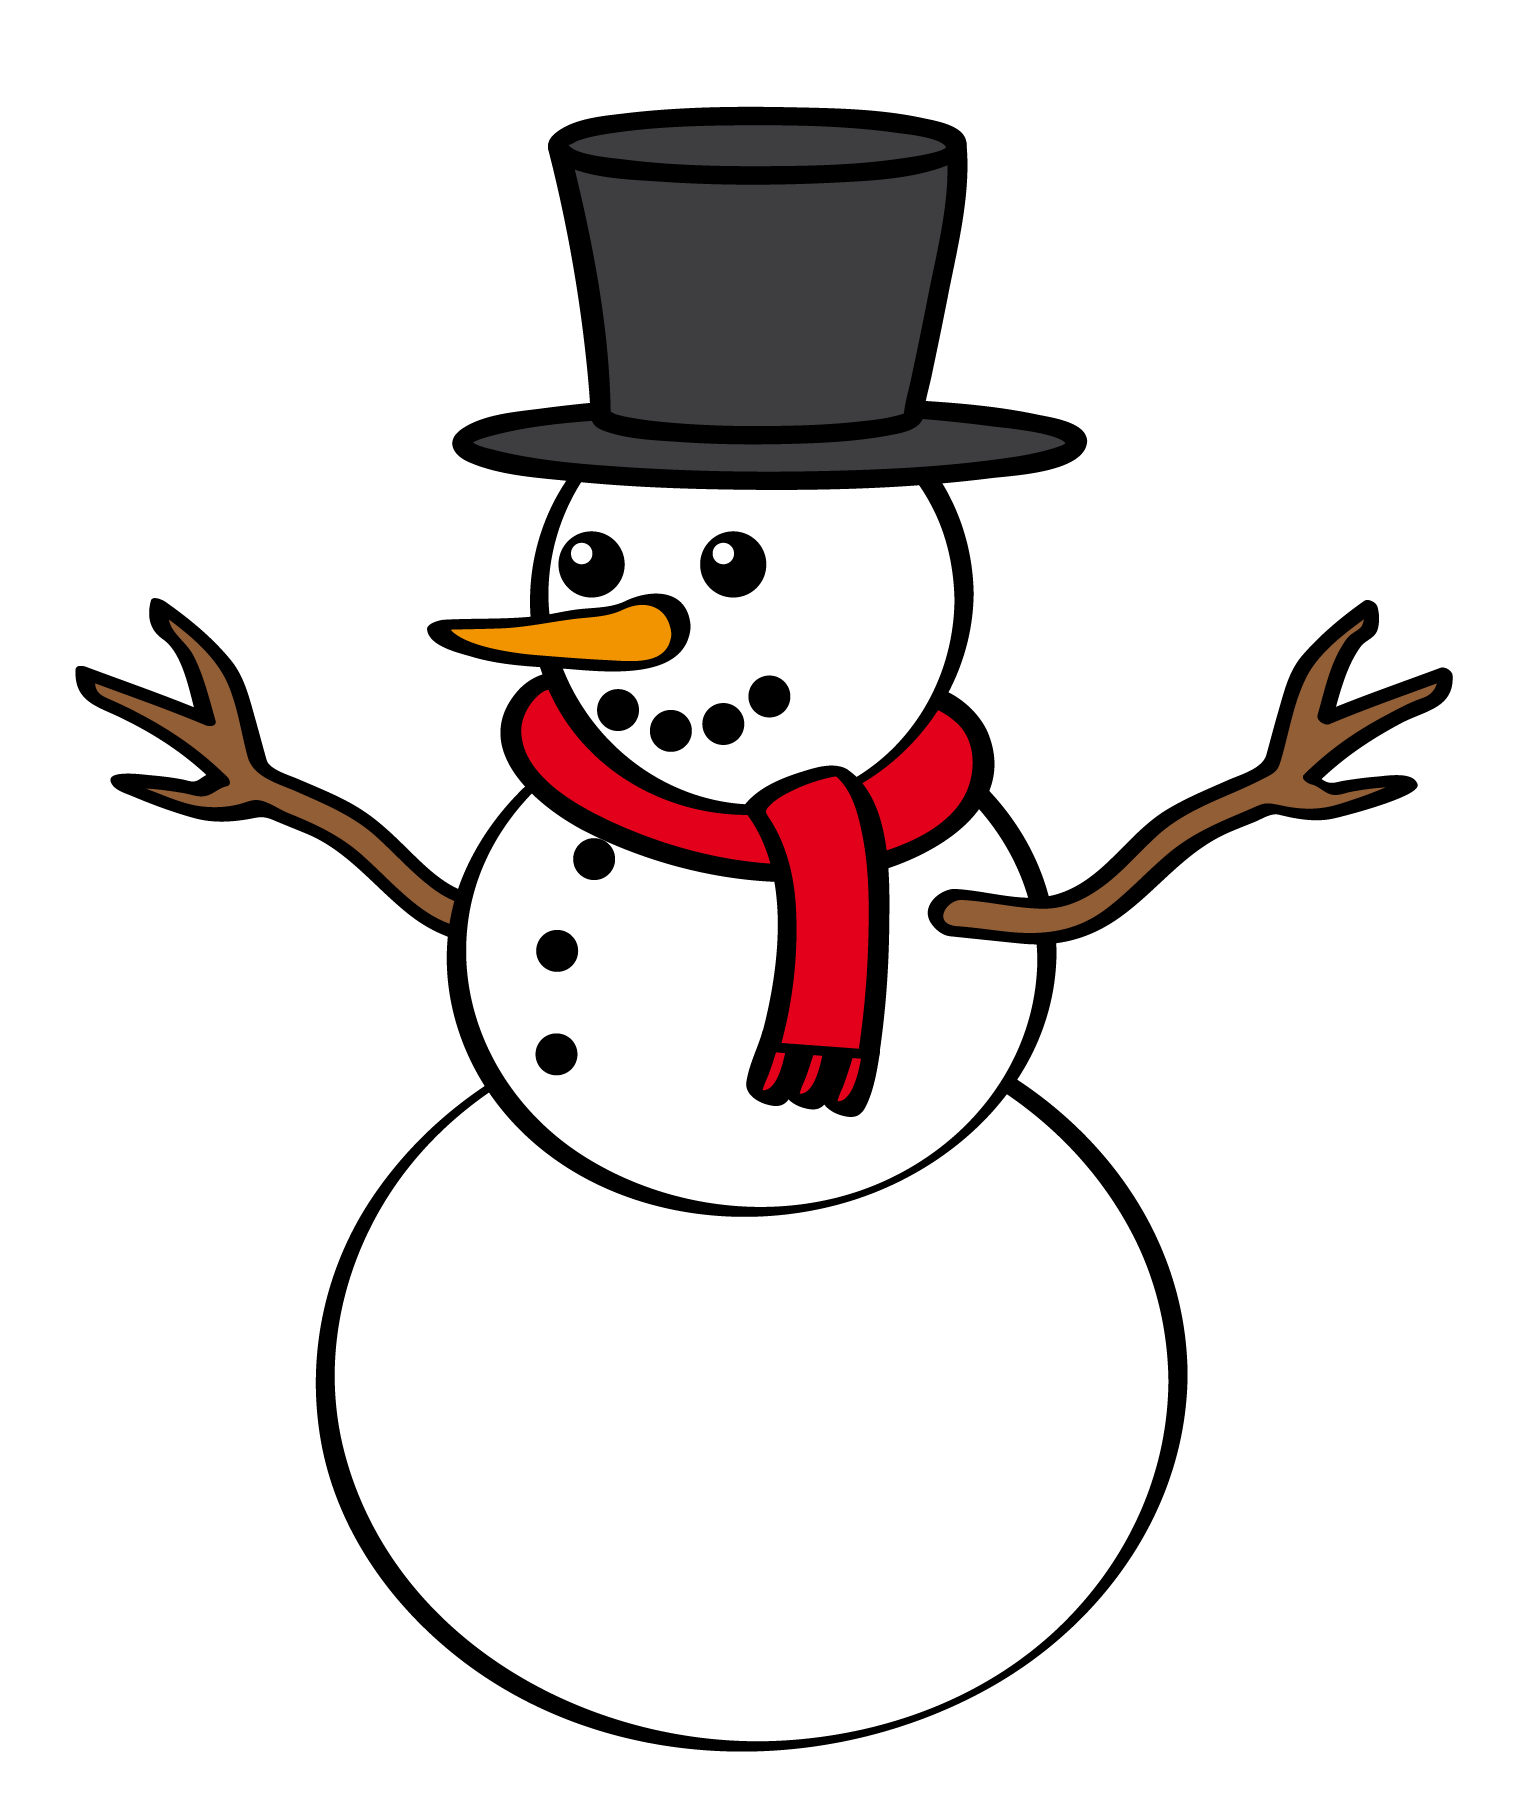 Snowman free download on. Fighting clipart clip art